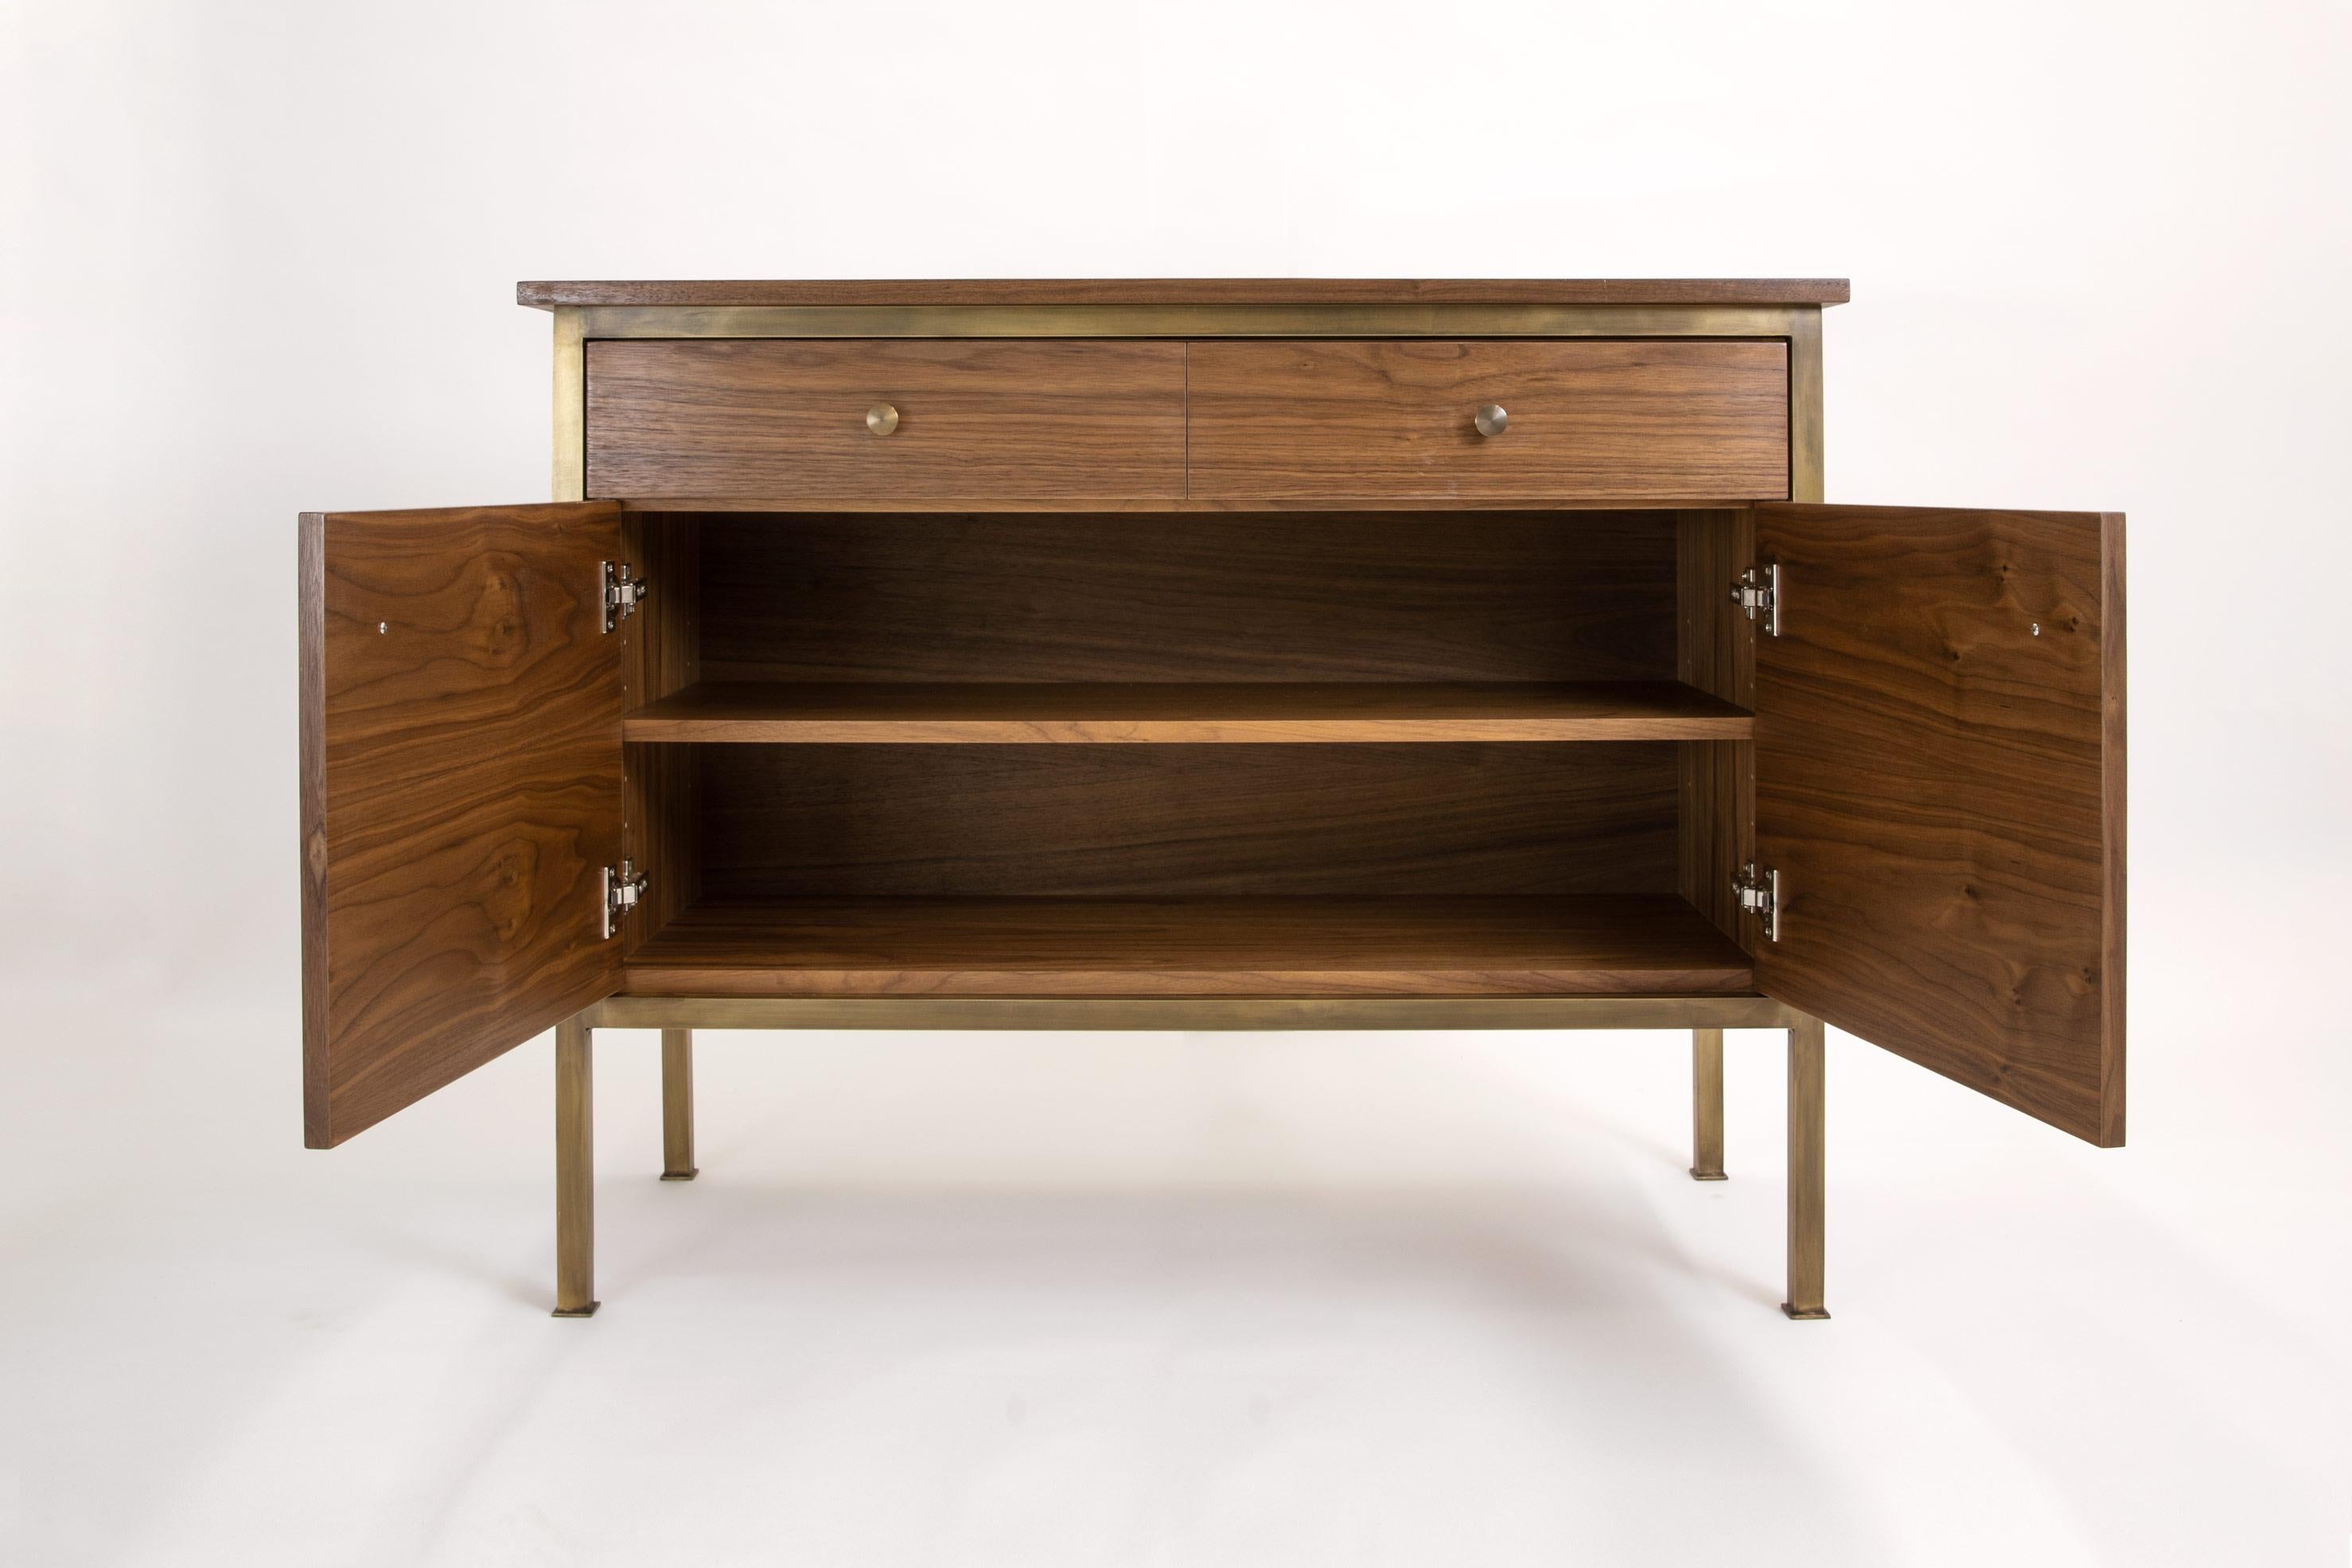 The Leopold Cabinet features a frame made of 1